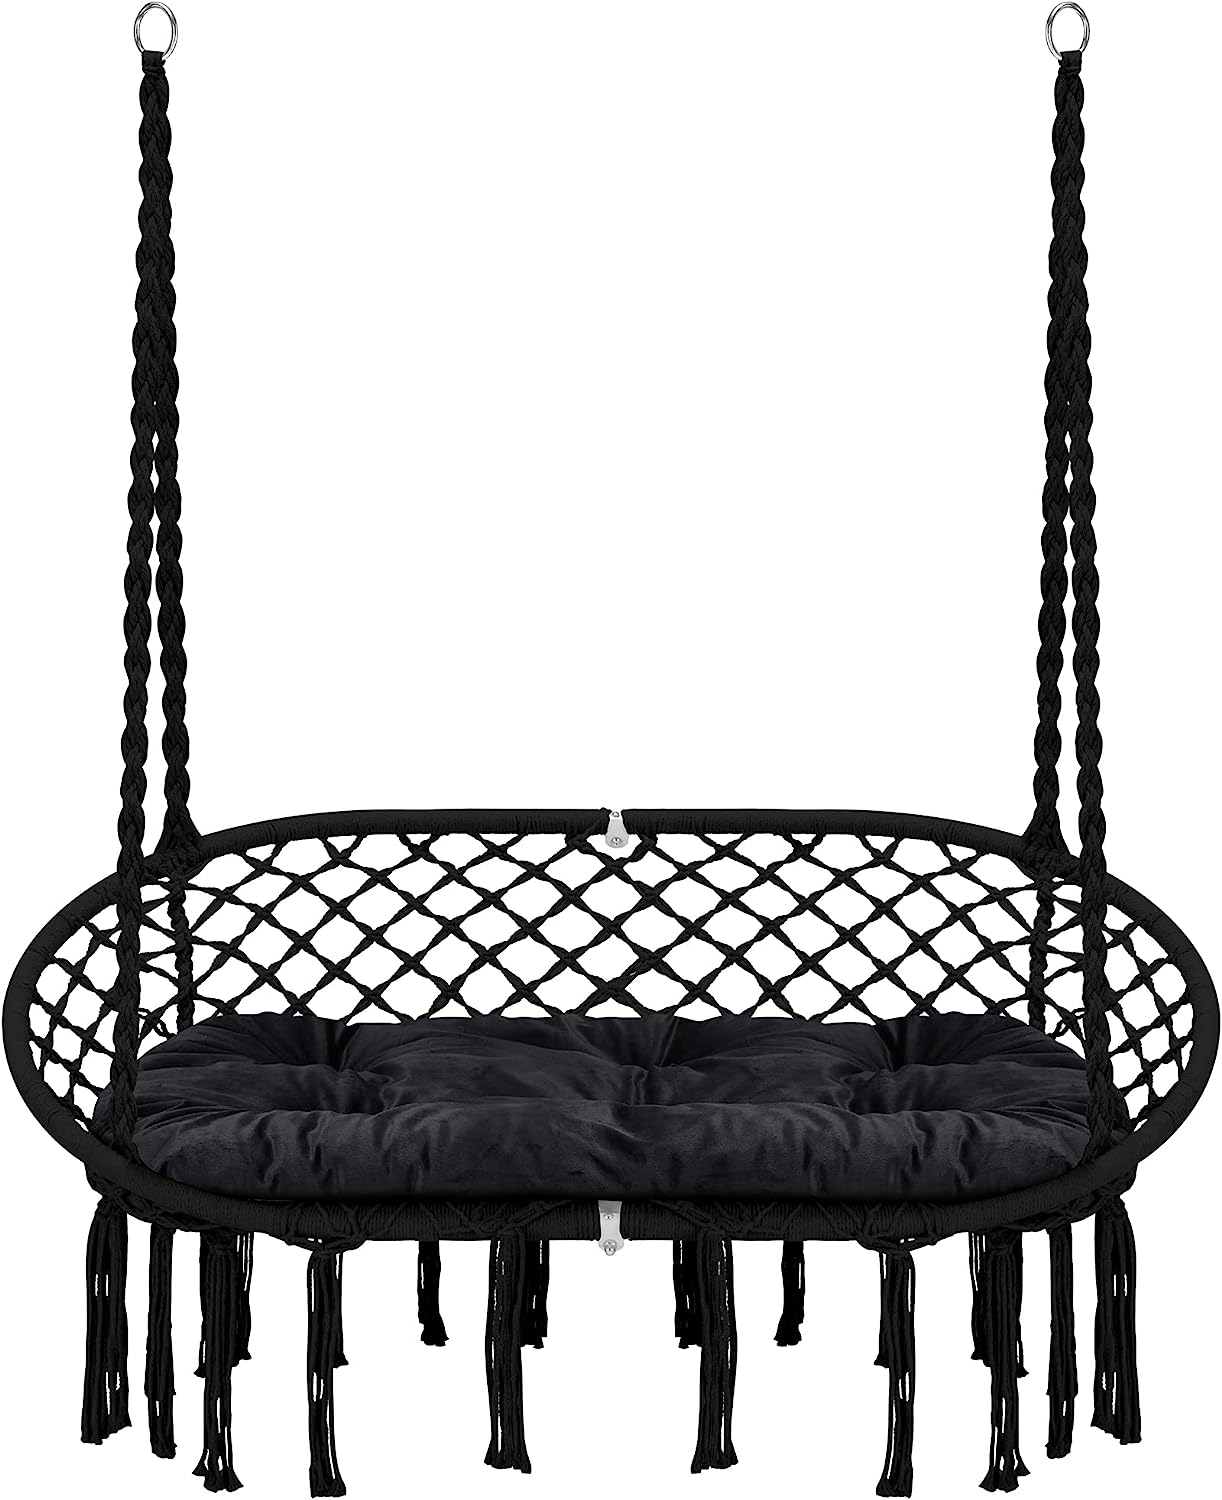 Primary image for Chair Hanging Swing with Cushion Hanging Cotton Ropes Metal Frame Indoor Outdoor